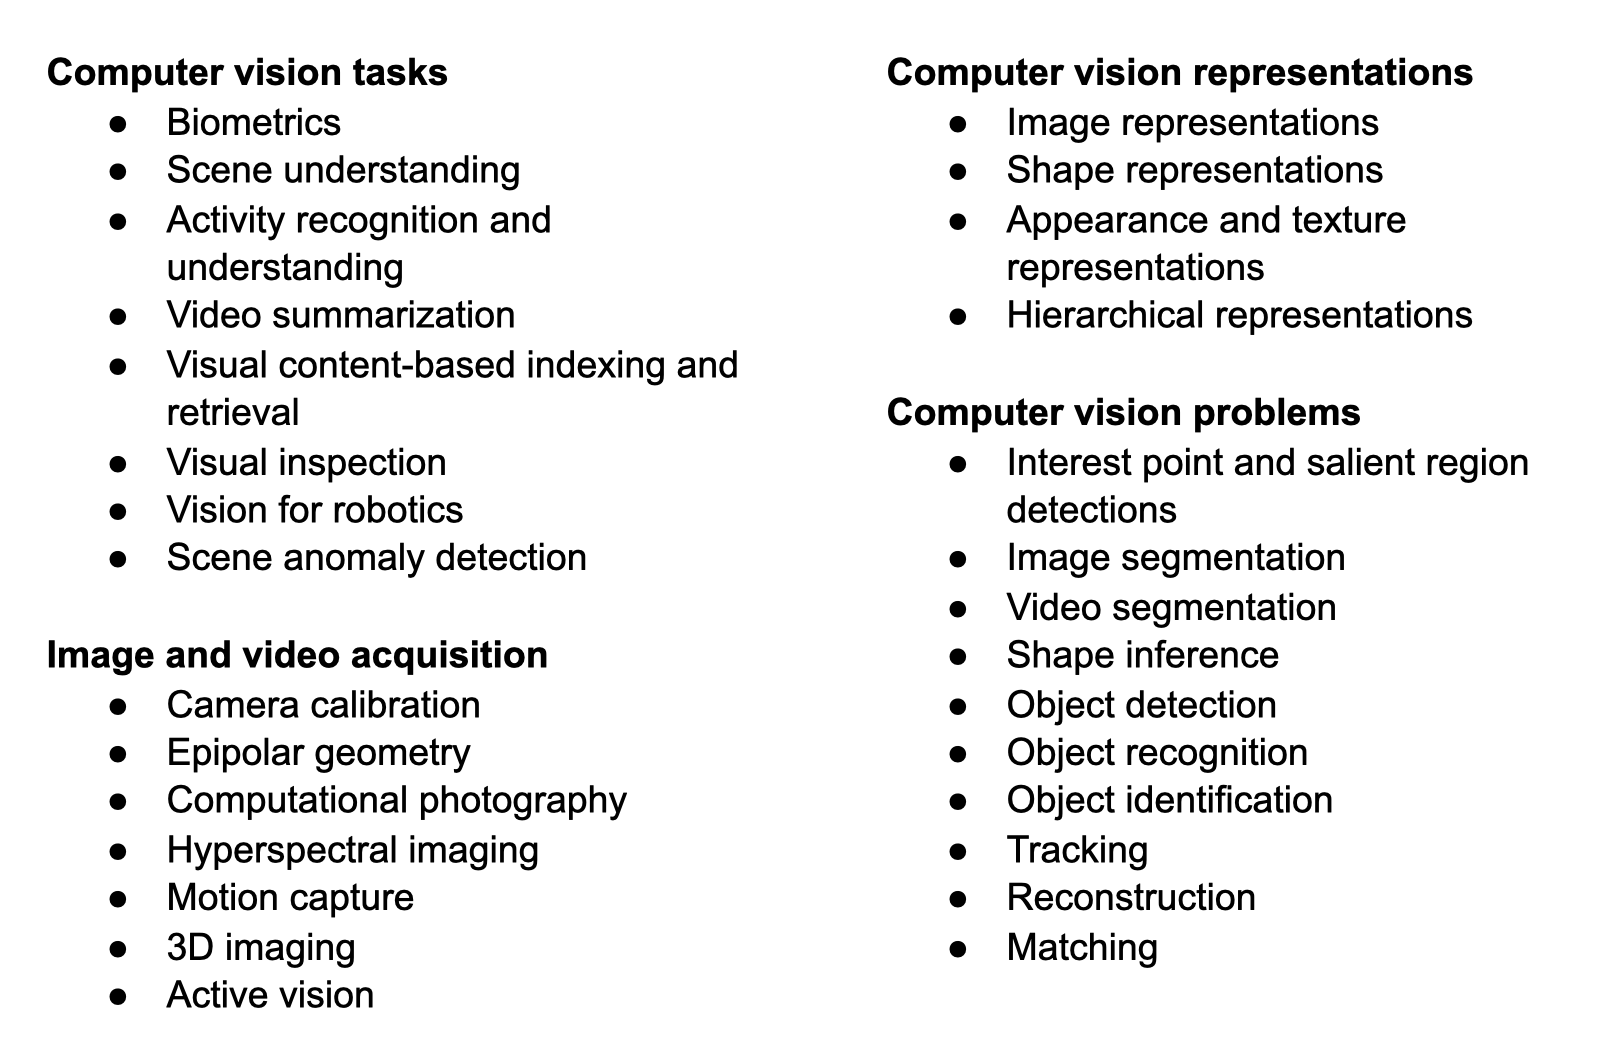 Computer Vision (CV) concepts listed in ACM Computing Classification System. Not all the concepts are CV tasks, and not all CV tasks are included here. But we can already see a diverse branches of CV tasks. In comparison, our knowledge on the graph learning task taxonomy is rather limited.